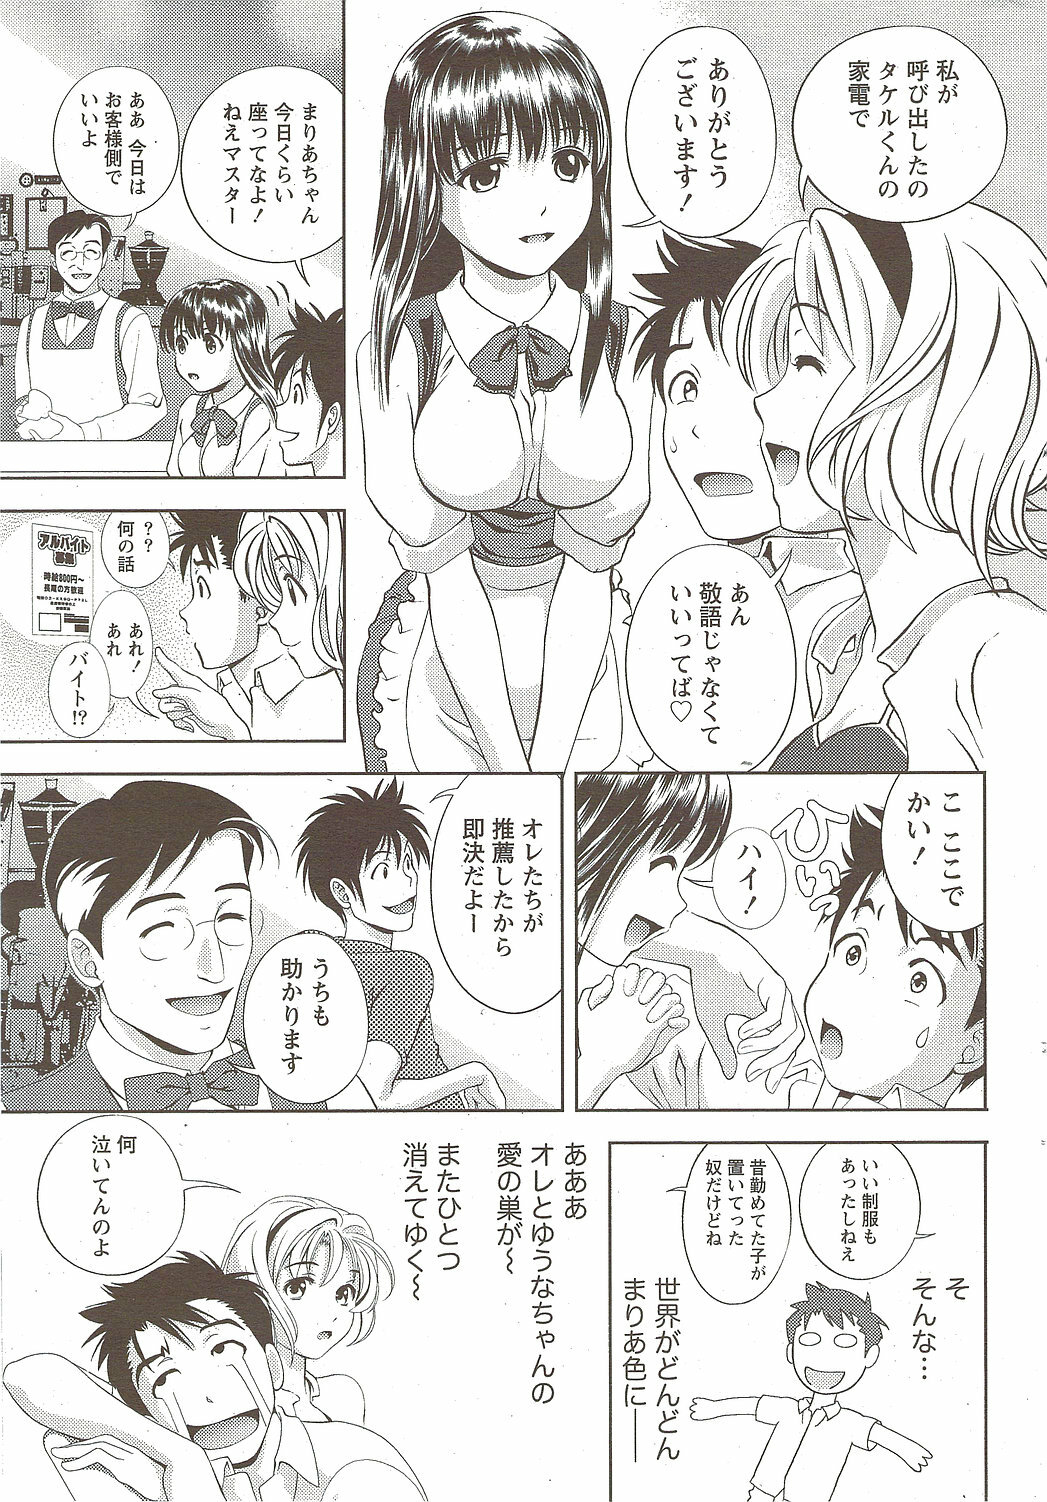 Monthly Vitaman 2009-12 page 35 full